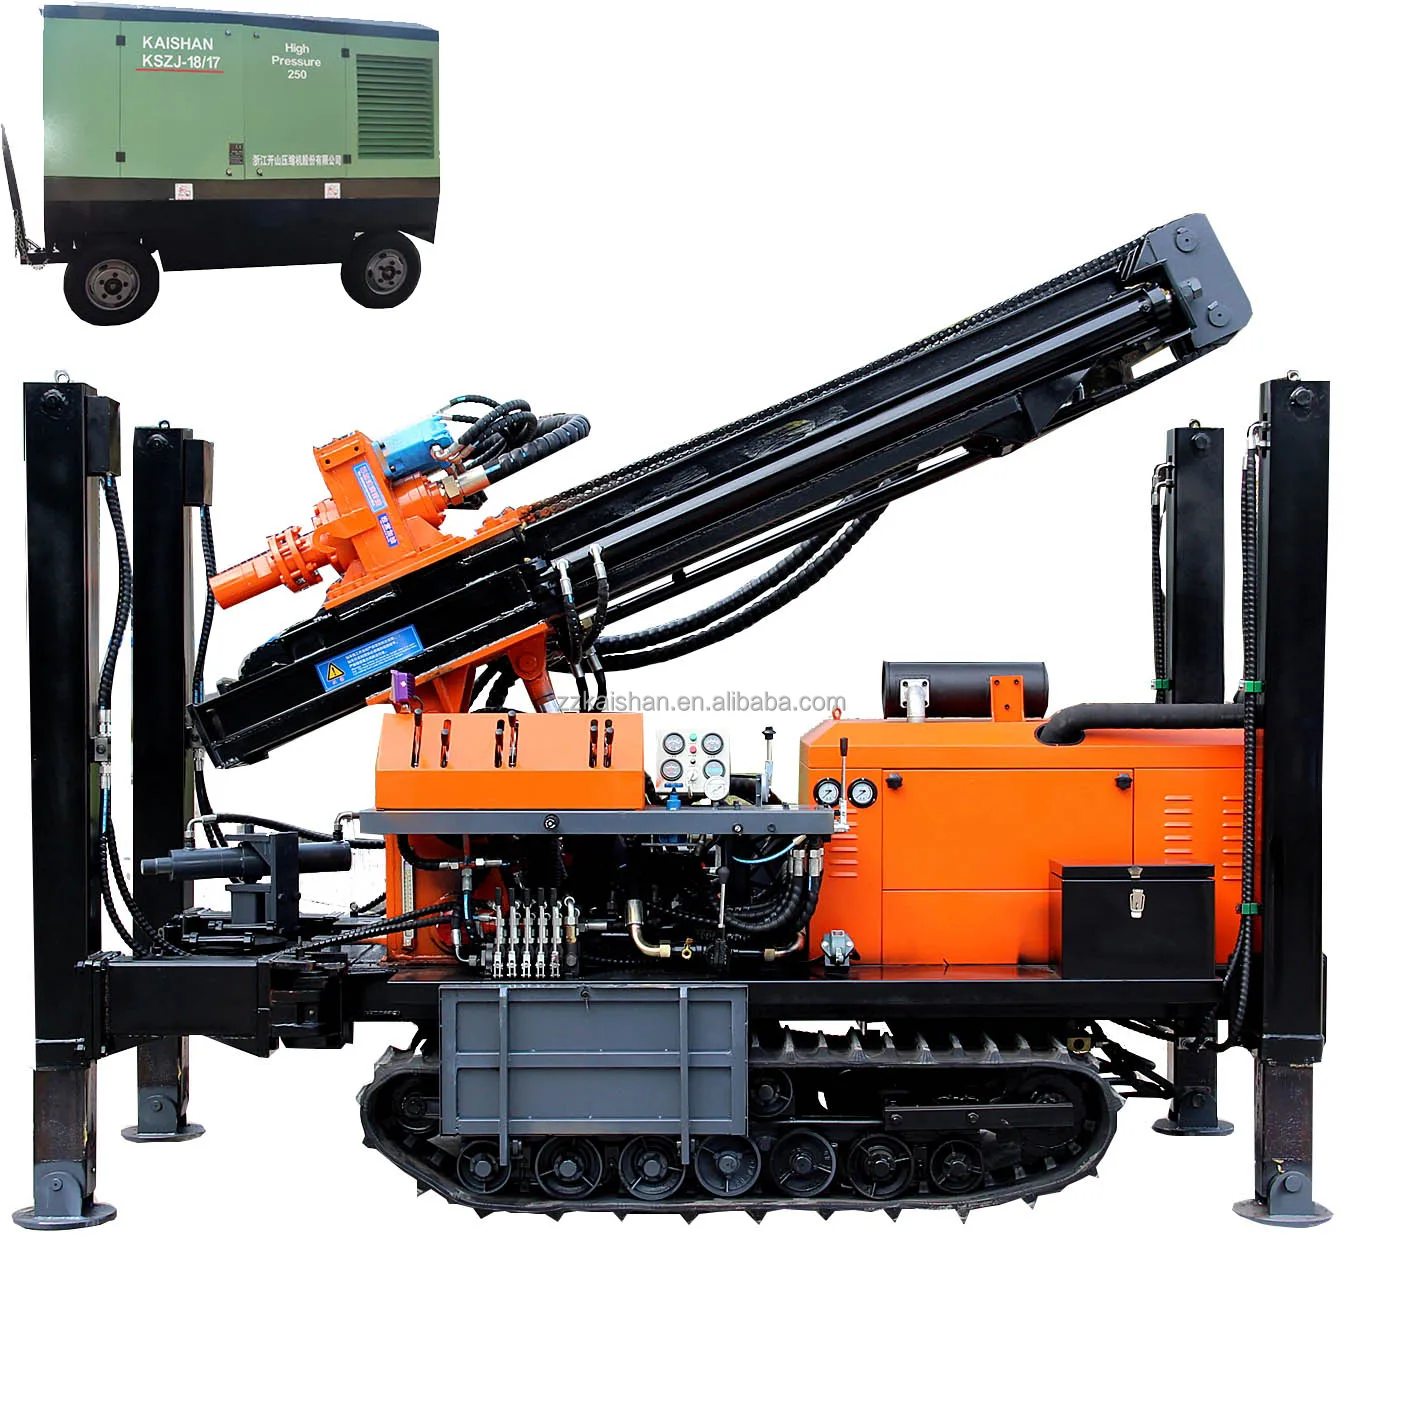 
 KW180R Rubber Crawler Full automatic Hot sale Portable borehole water well drilling rig machine pr